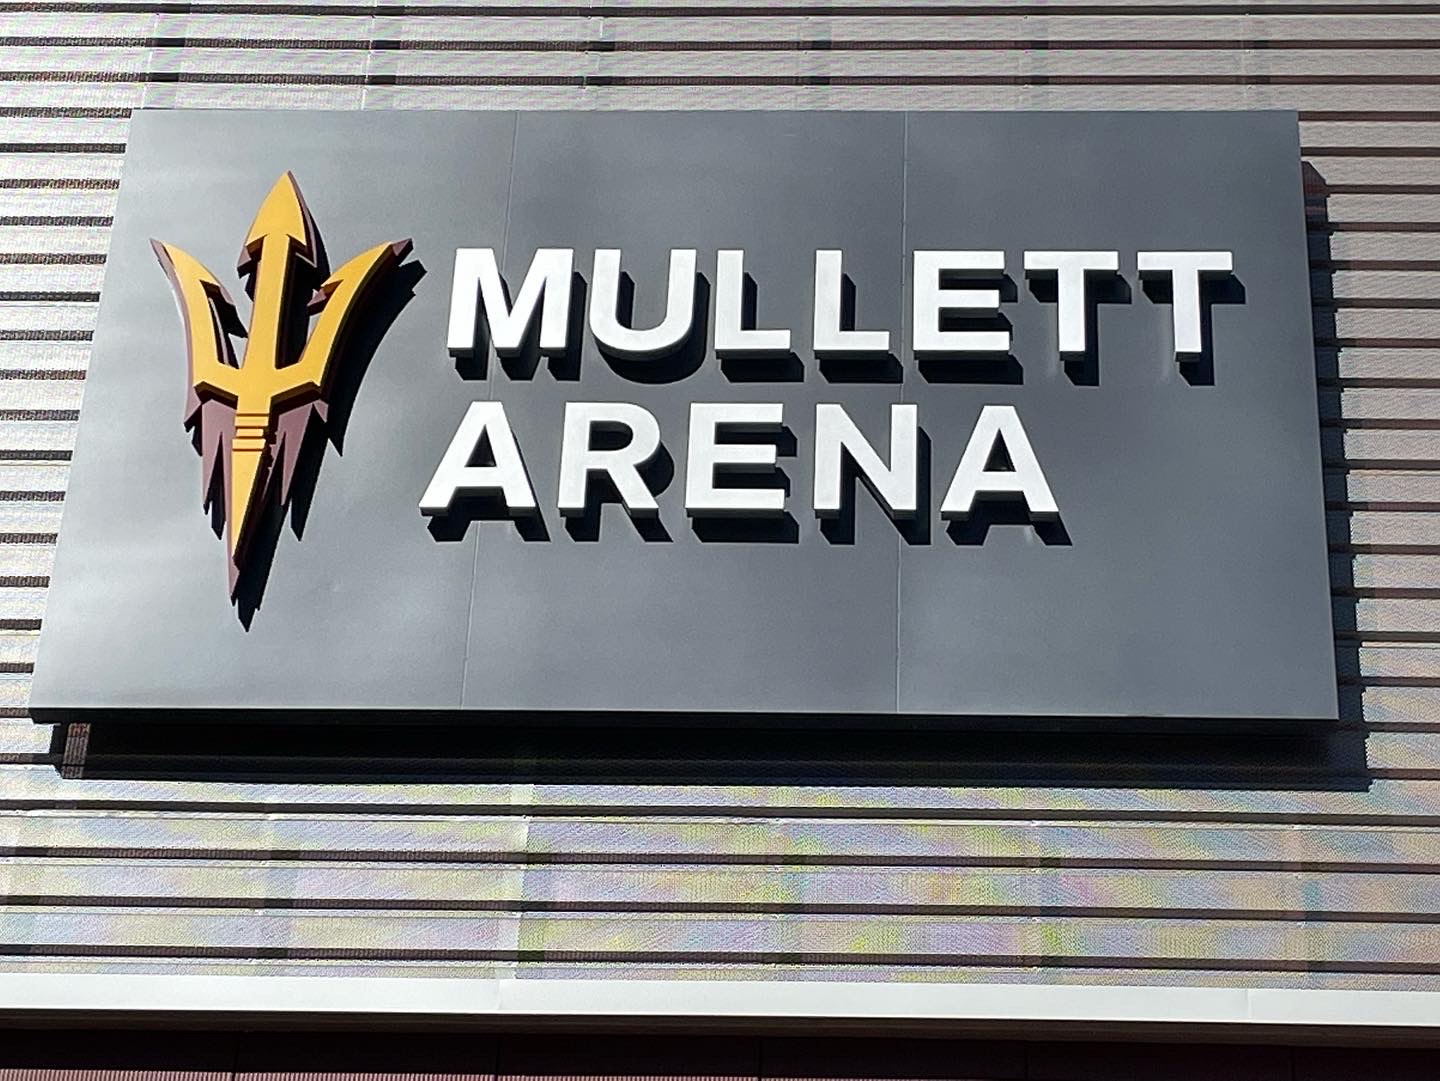 Does Mullett Arena deserve all the negative publicity?